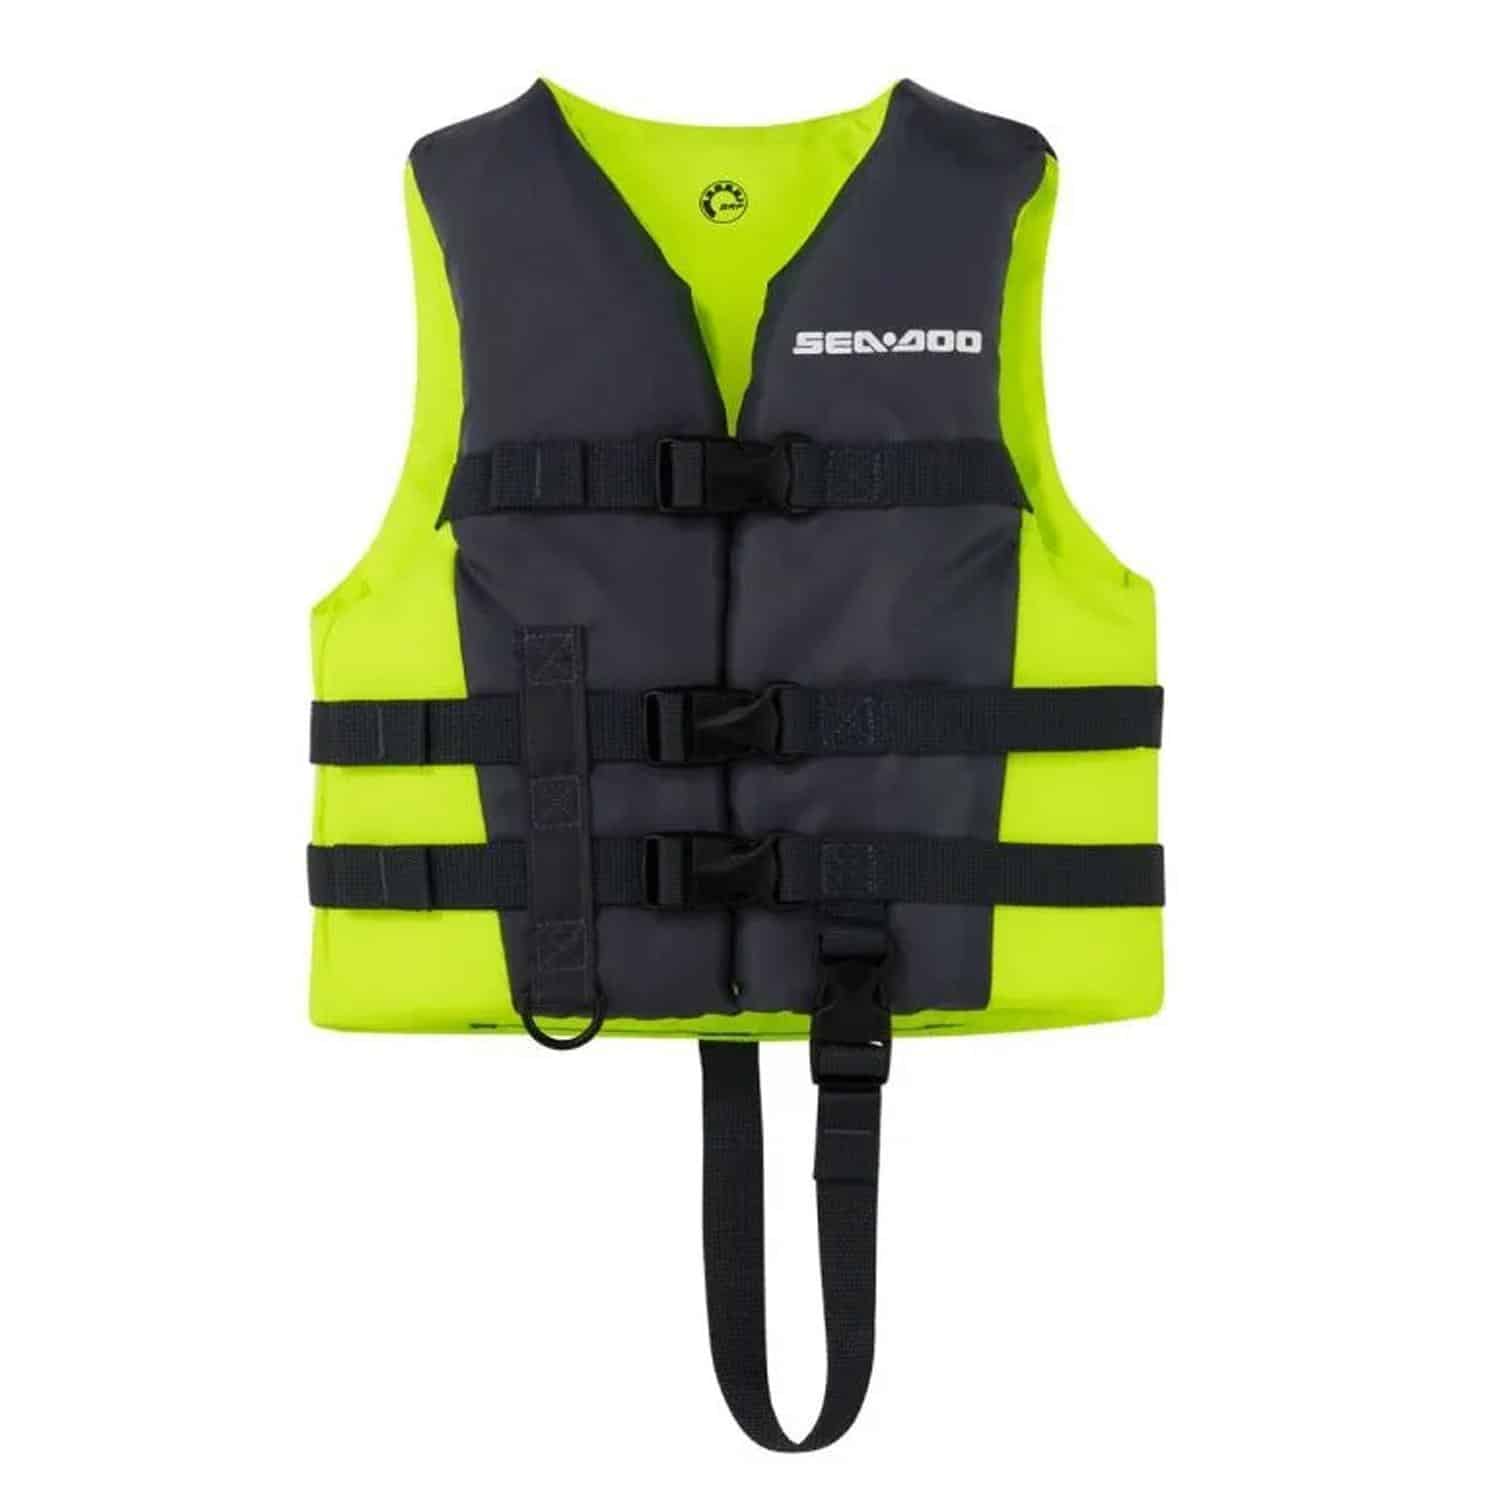 Children's Life Jacket Rentals - Safety First | Fun and More Rentals